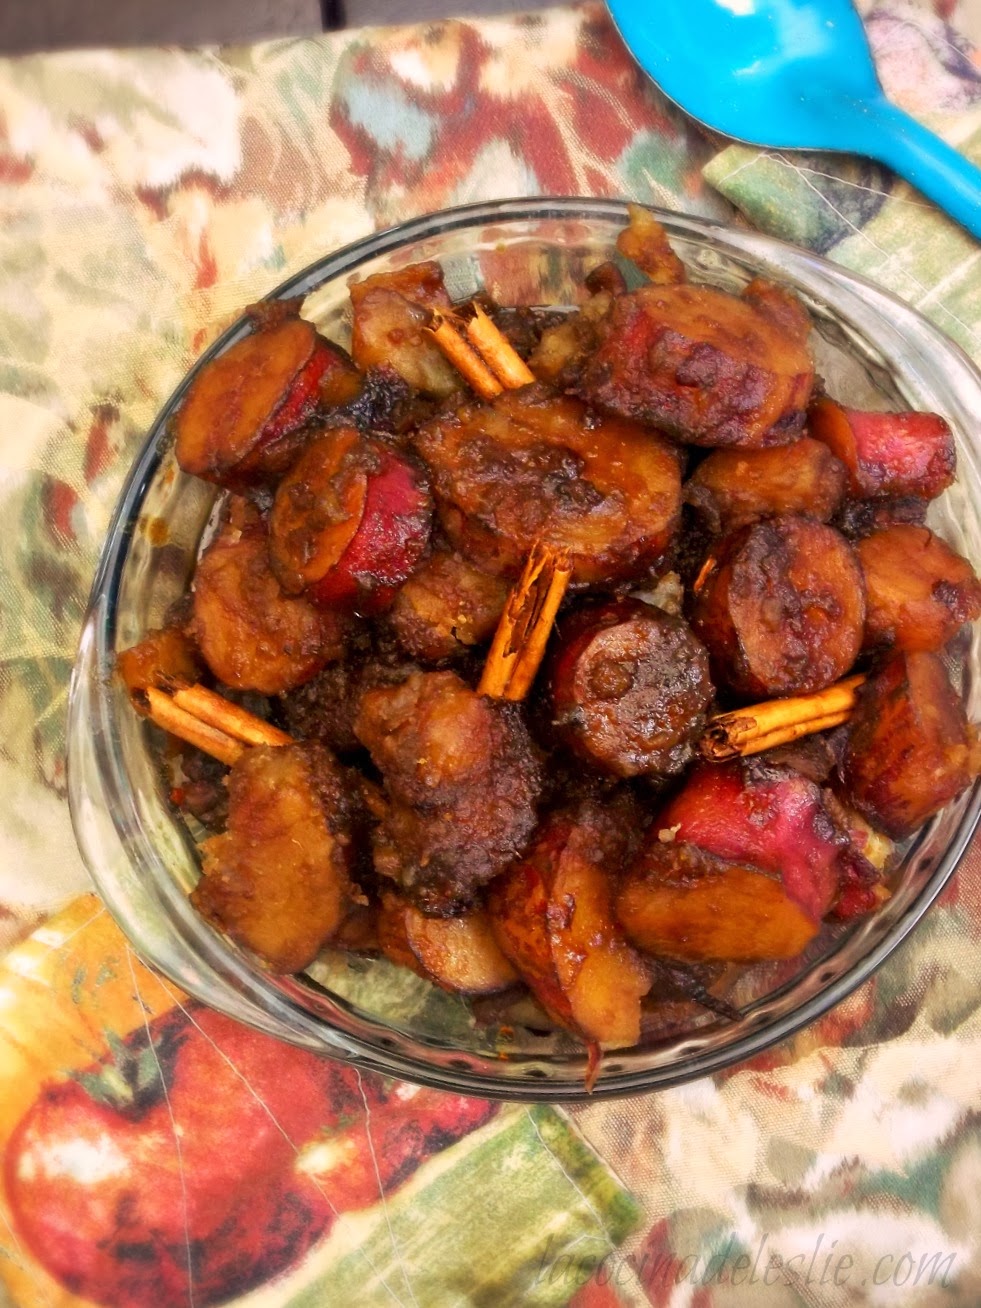 Camotes Enmielados (Mexican Candied Sweet Potatoes) #SundaySupper - La ...